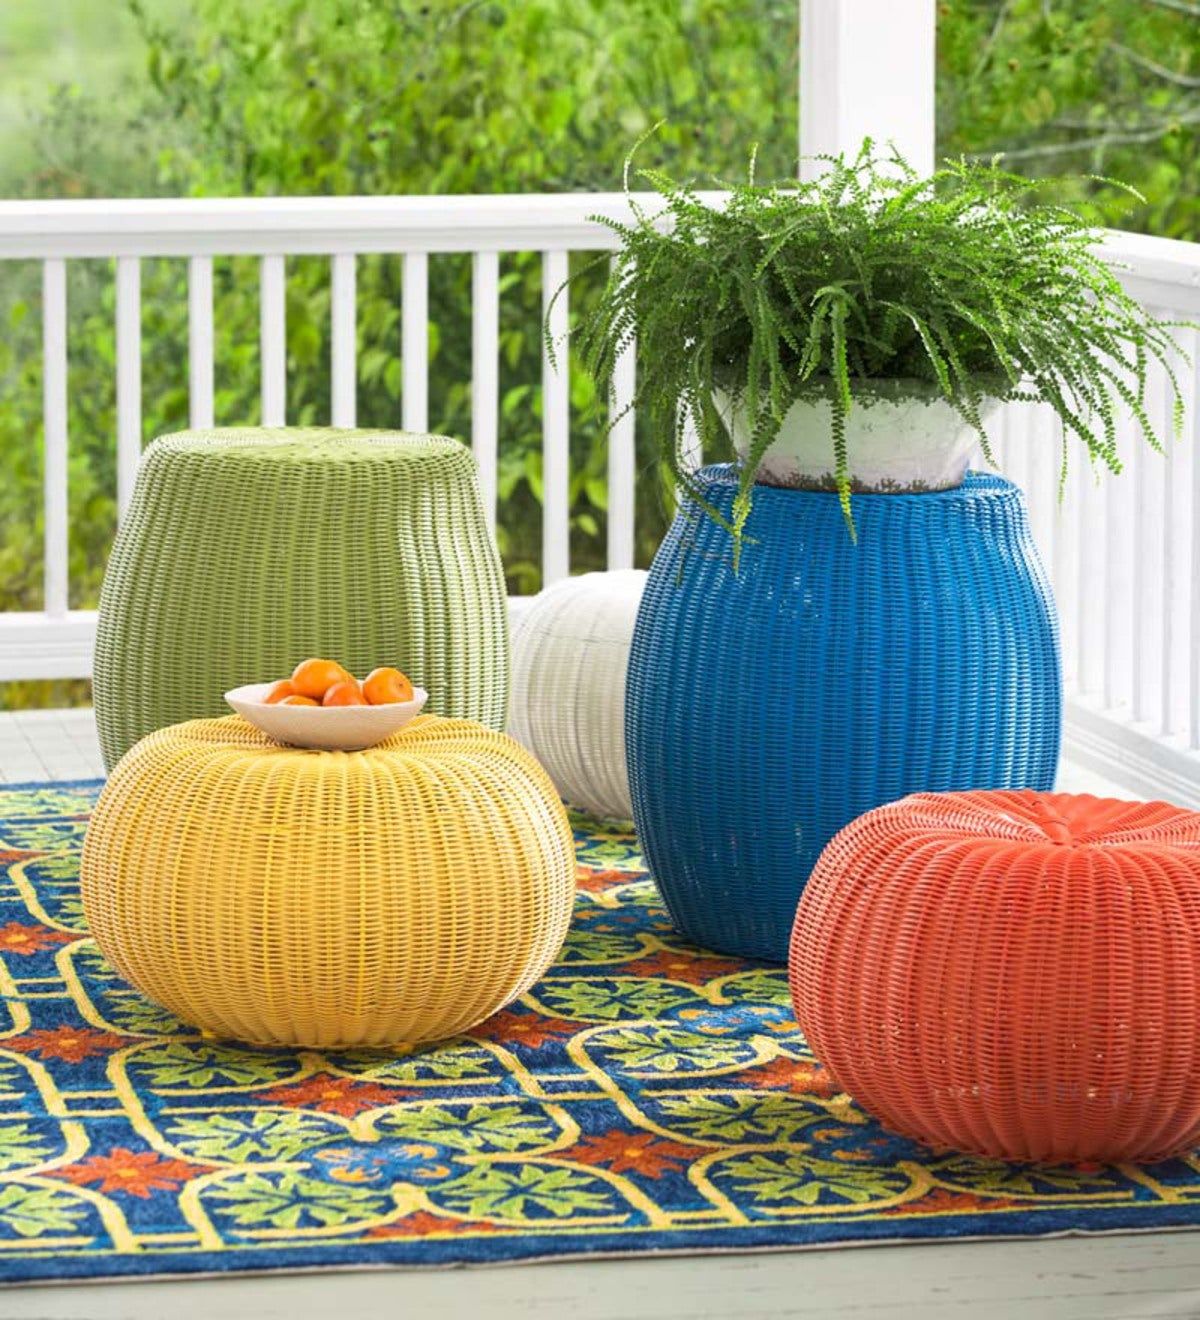 Sale! Large Tangier Wicker Outdoor Ottoman Pouf – Red | Plowhearth Intended For Woven Pouf Ottomans (View 20 of 20)